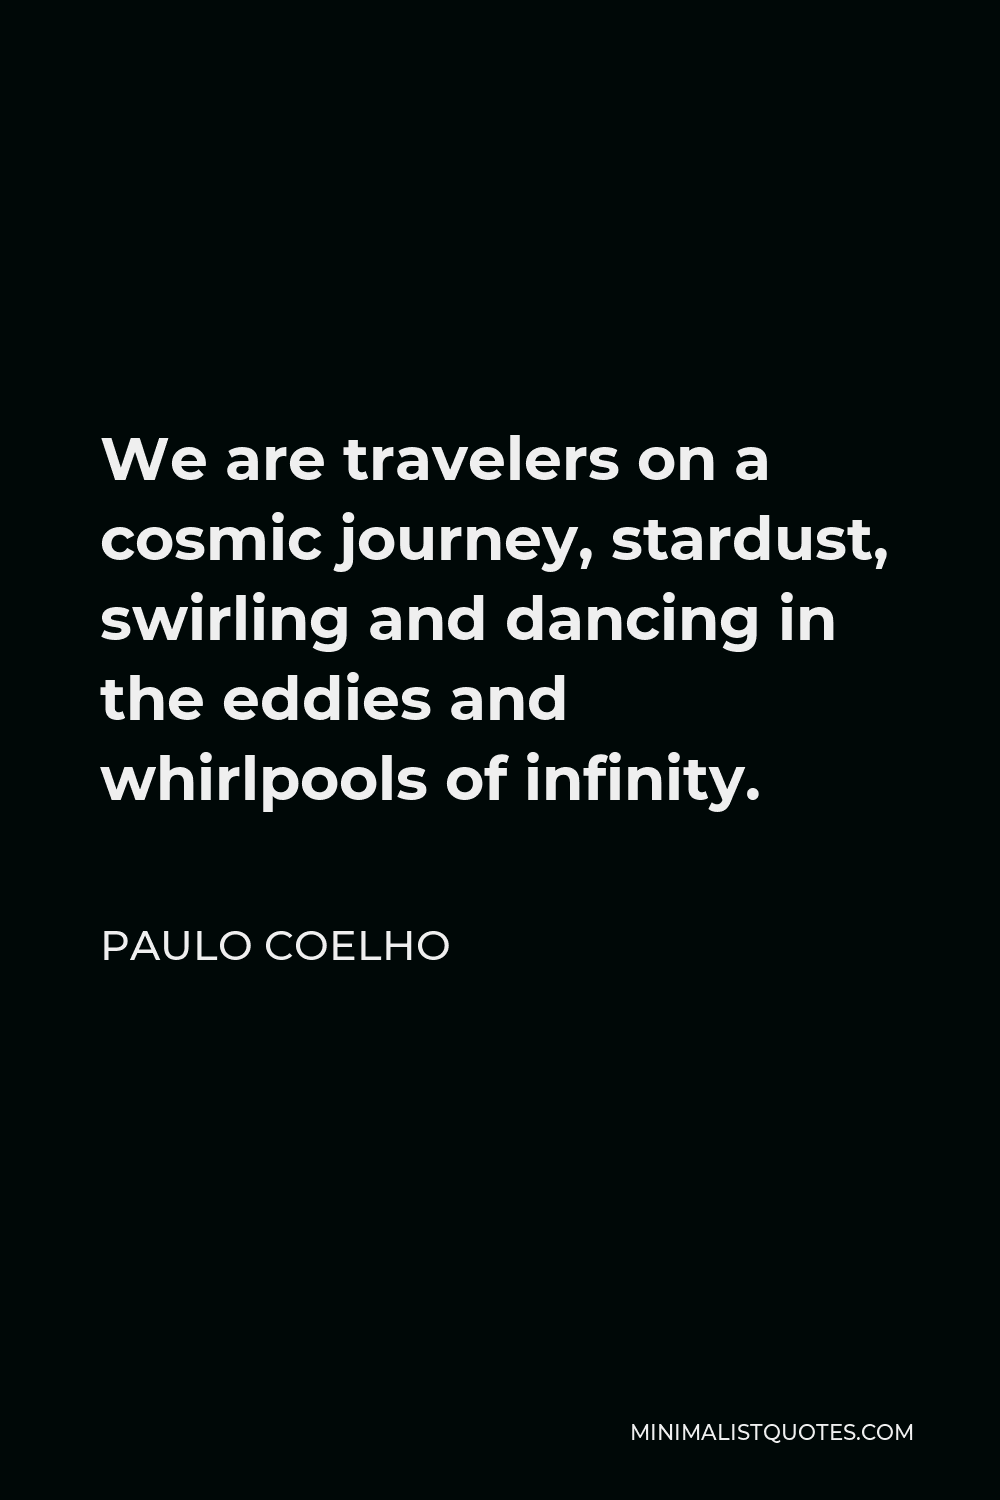 Paulo Coelho Quote - We are travelers on a cosmic journey, stardust, swirling and dancing in the eddies and whirlpools of infinity.